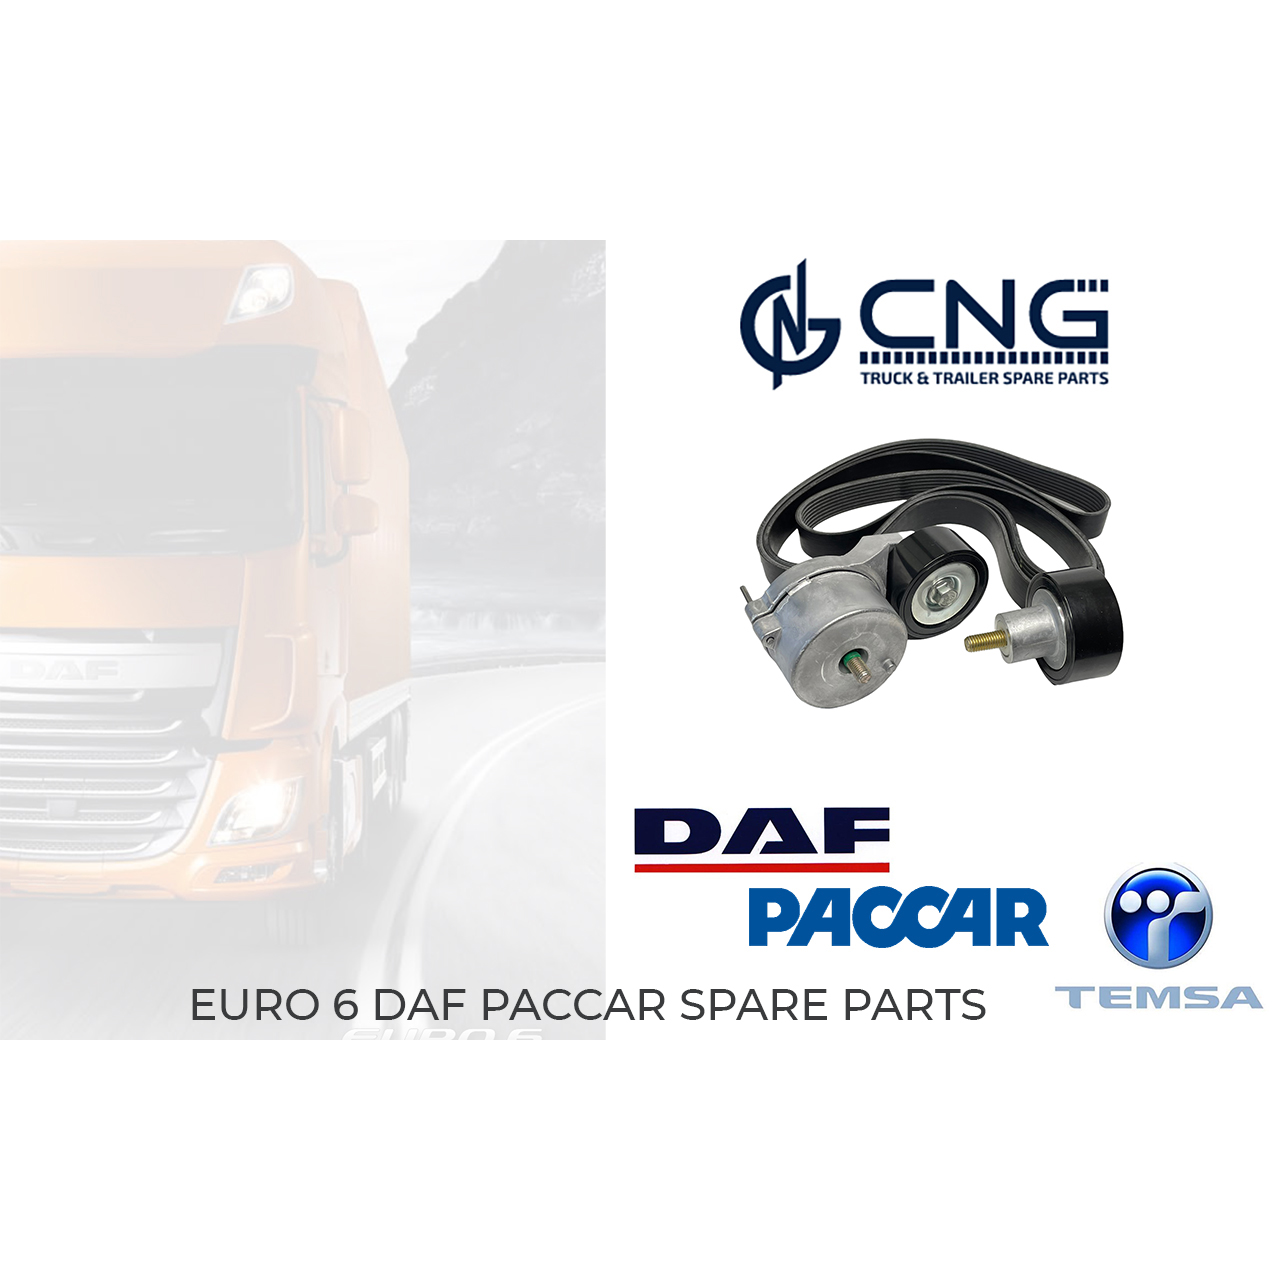 EURO 6 DAF PACCAR SPARE PARTS, DAF XF106 SPARE PARTS, TRUCK SPARE PARTS, PACCAR ENGINE PARTS, VDL SPARE PARTS, VDL BUS PARTS, TEMSA SAFIR PLUS BUS PARTS